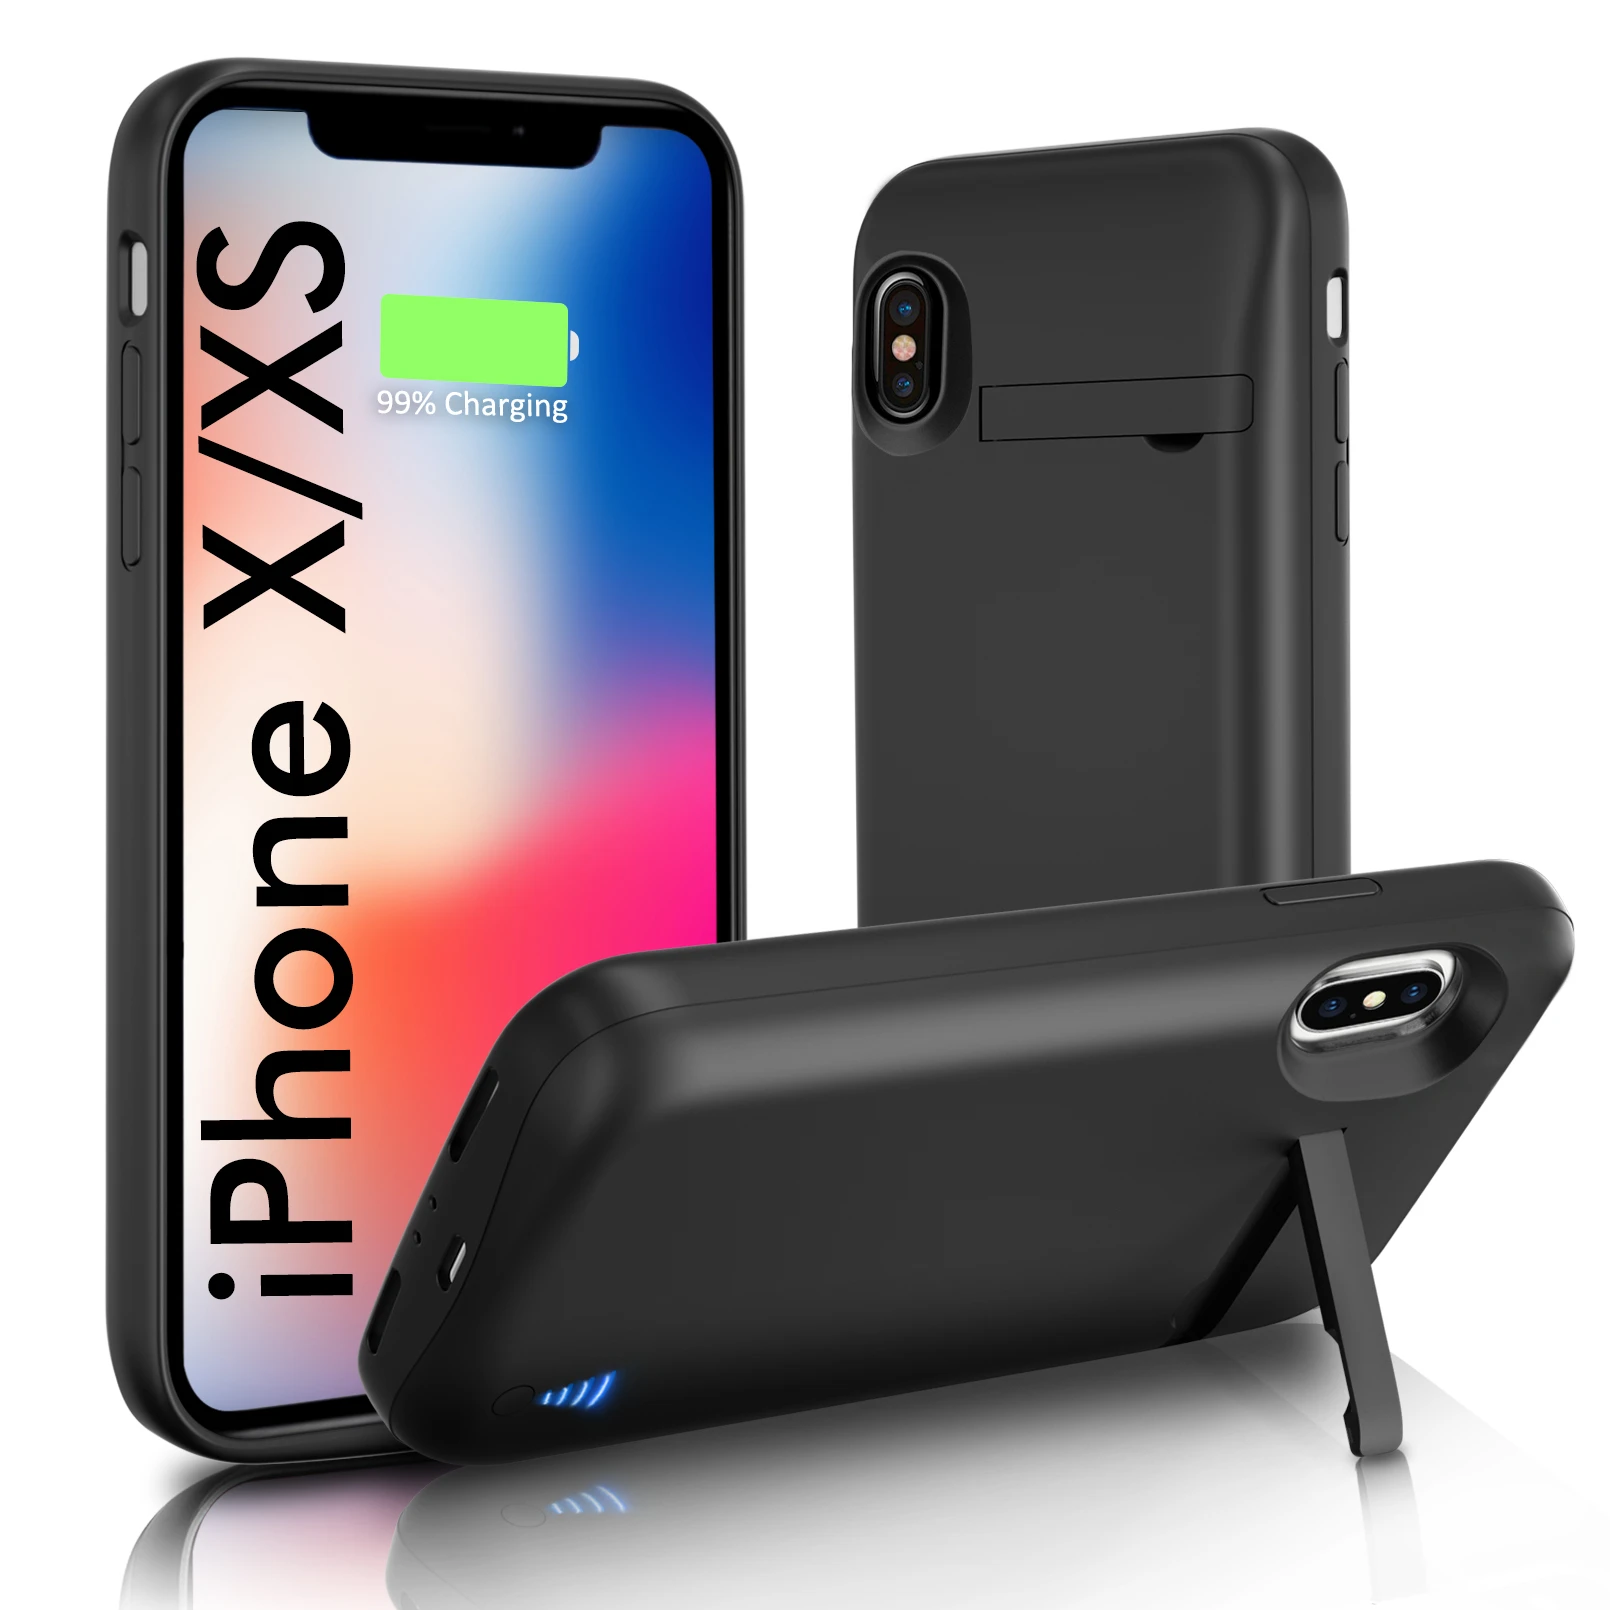 leather iphone 11 Pro Max case 6000mAh External Battery Charger Case For iPhone X XS XS Max Charging Case Portable Mobile Phones Housing For Powerbank Cover case iphone 11 Pro Max 